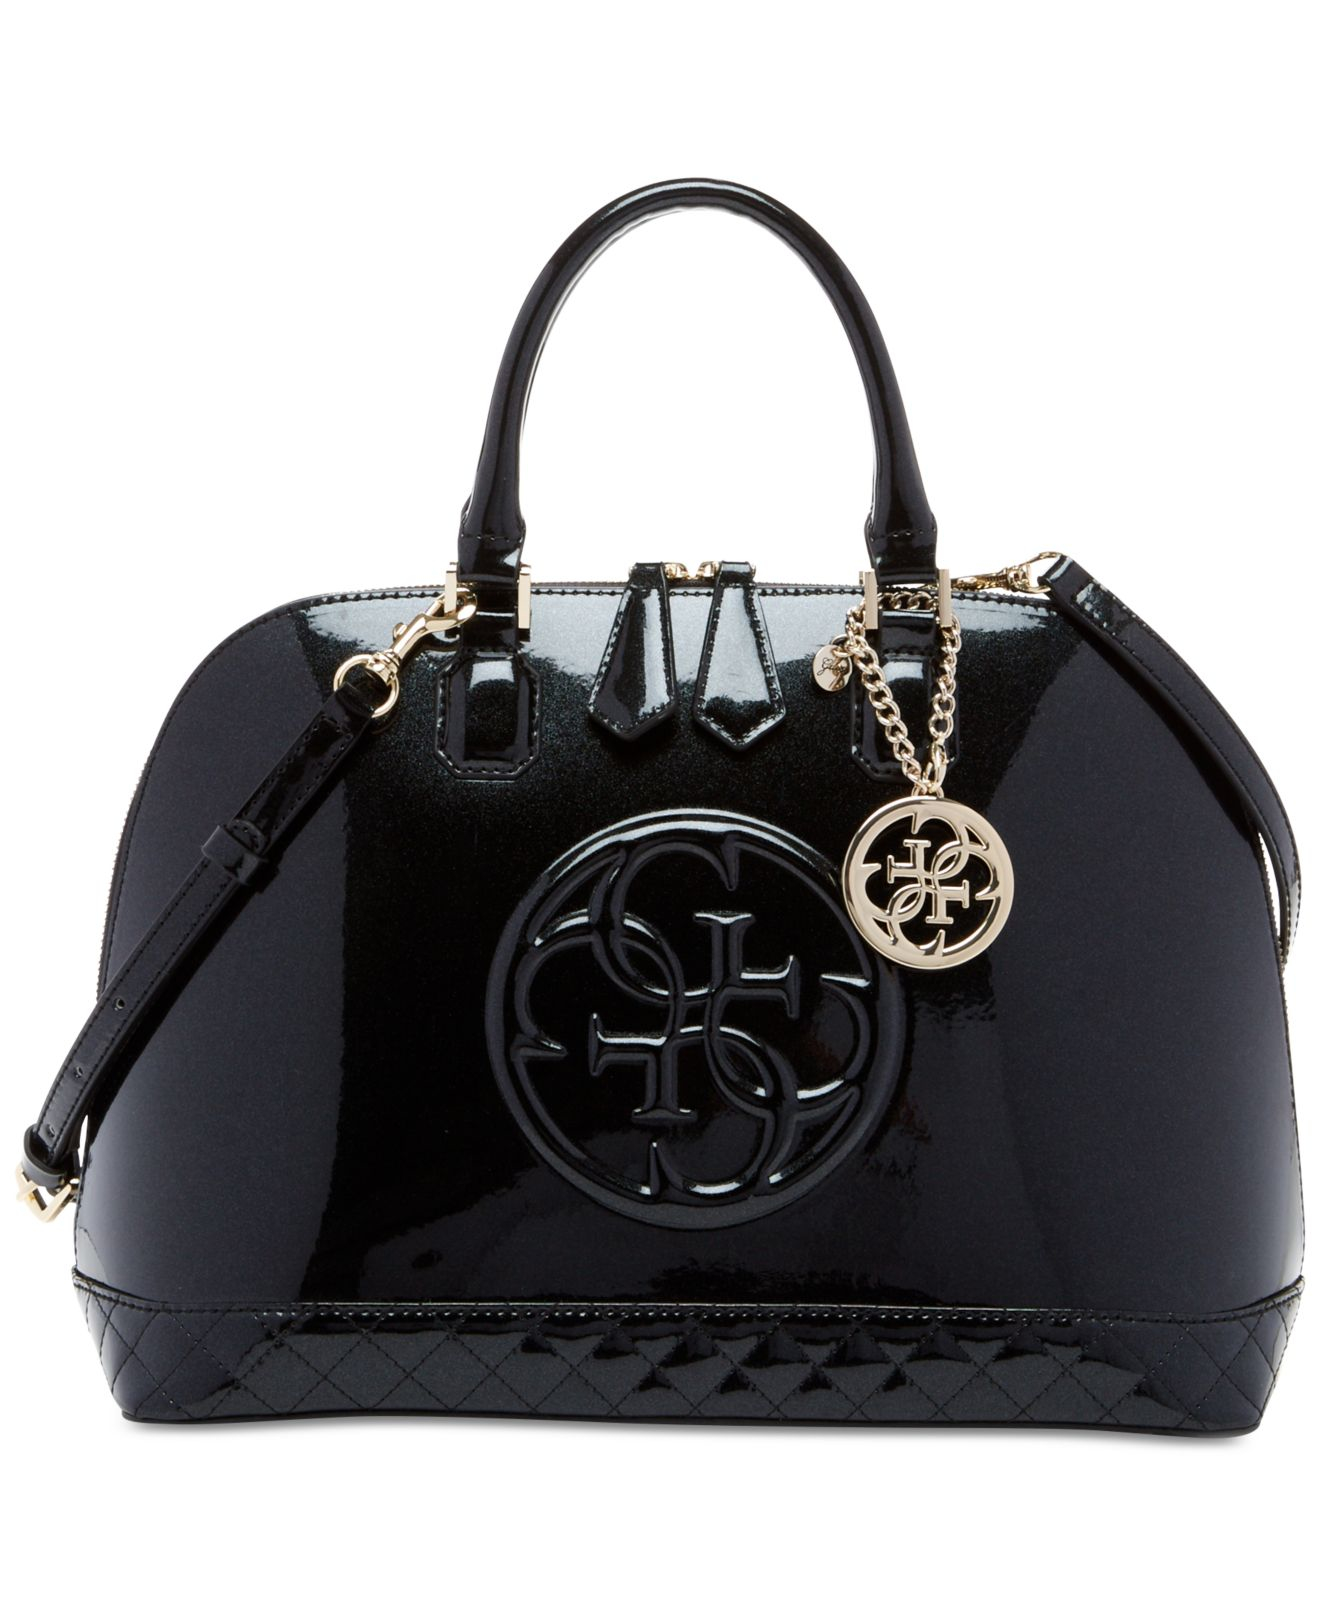 Lyst Guess Korry Dome Satchel In Black